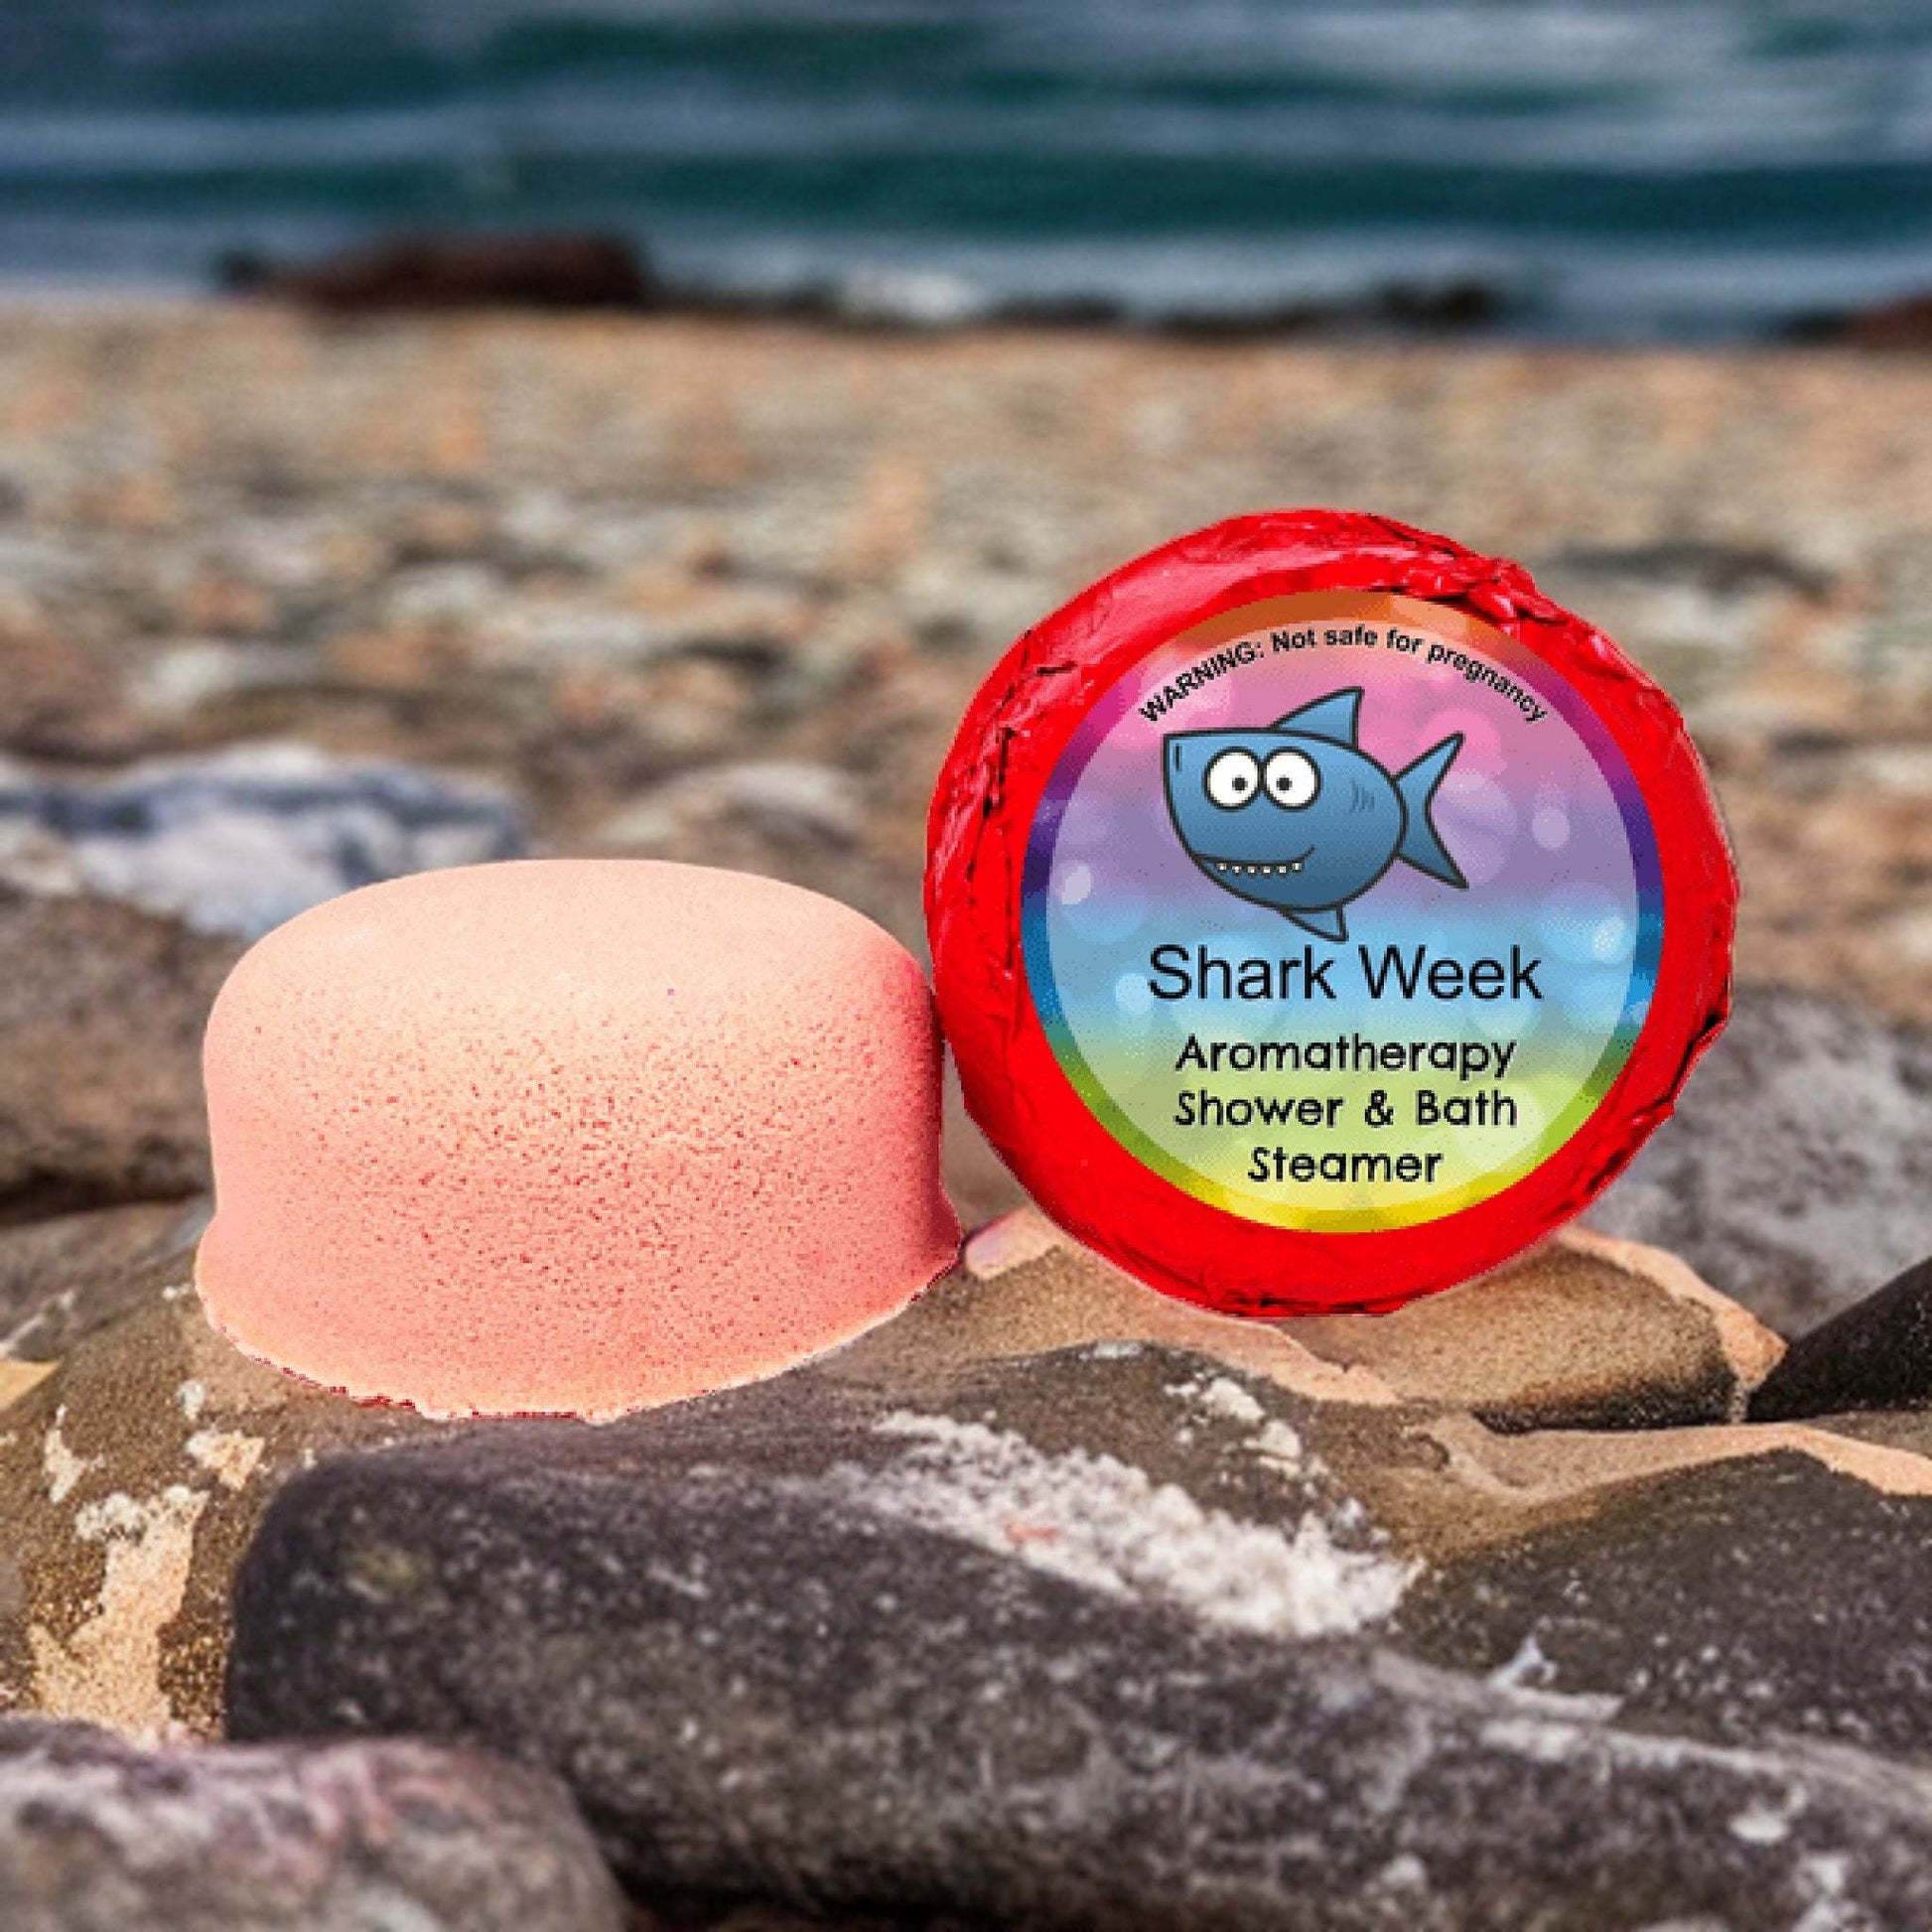 Turn your bathroom into a spa with our Shark Week Shower Steamer - designed for powerful PMS relief through aromatherapy.